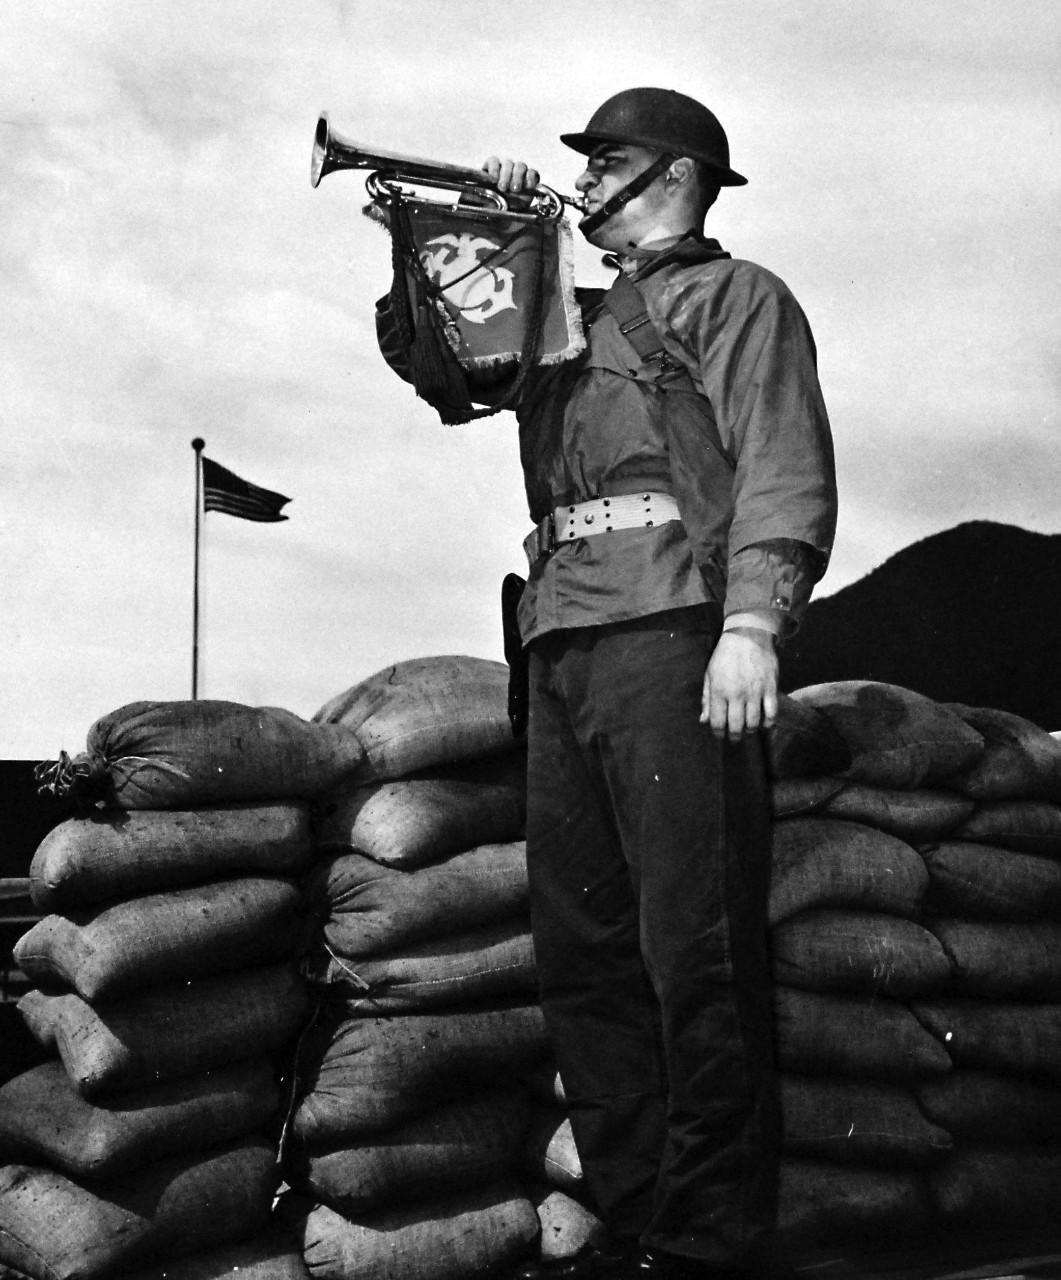 80-G-40995:   Aleutian Islands Campaign, June 1942-August 1943.    From a sandbagged post somewhere on the Alaskan frontier, a U.S. Marine bugler calls his comrades to their stations.   Photograph released March 30, 1943.  Official U.S. Navy Photograph, now in the collections of the National Archives.  (2016/12/20).